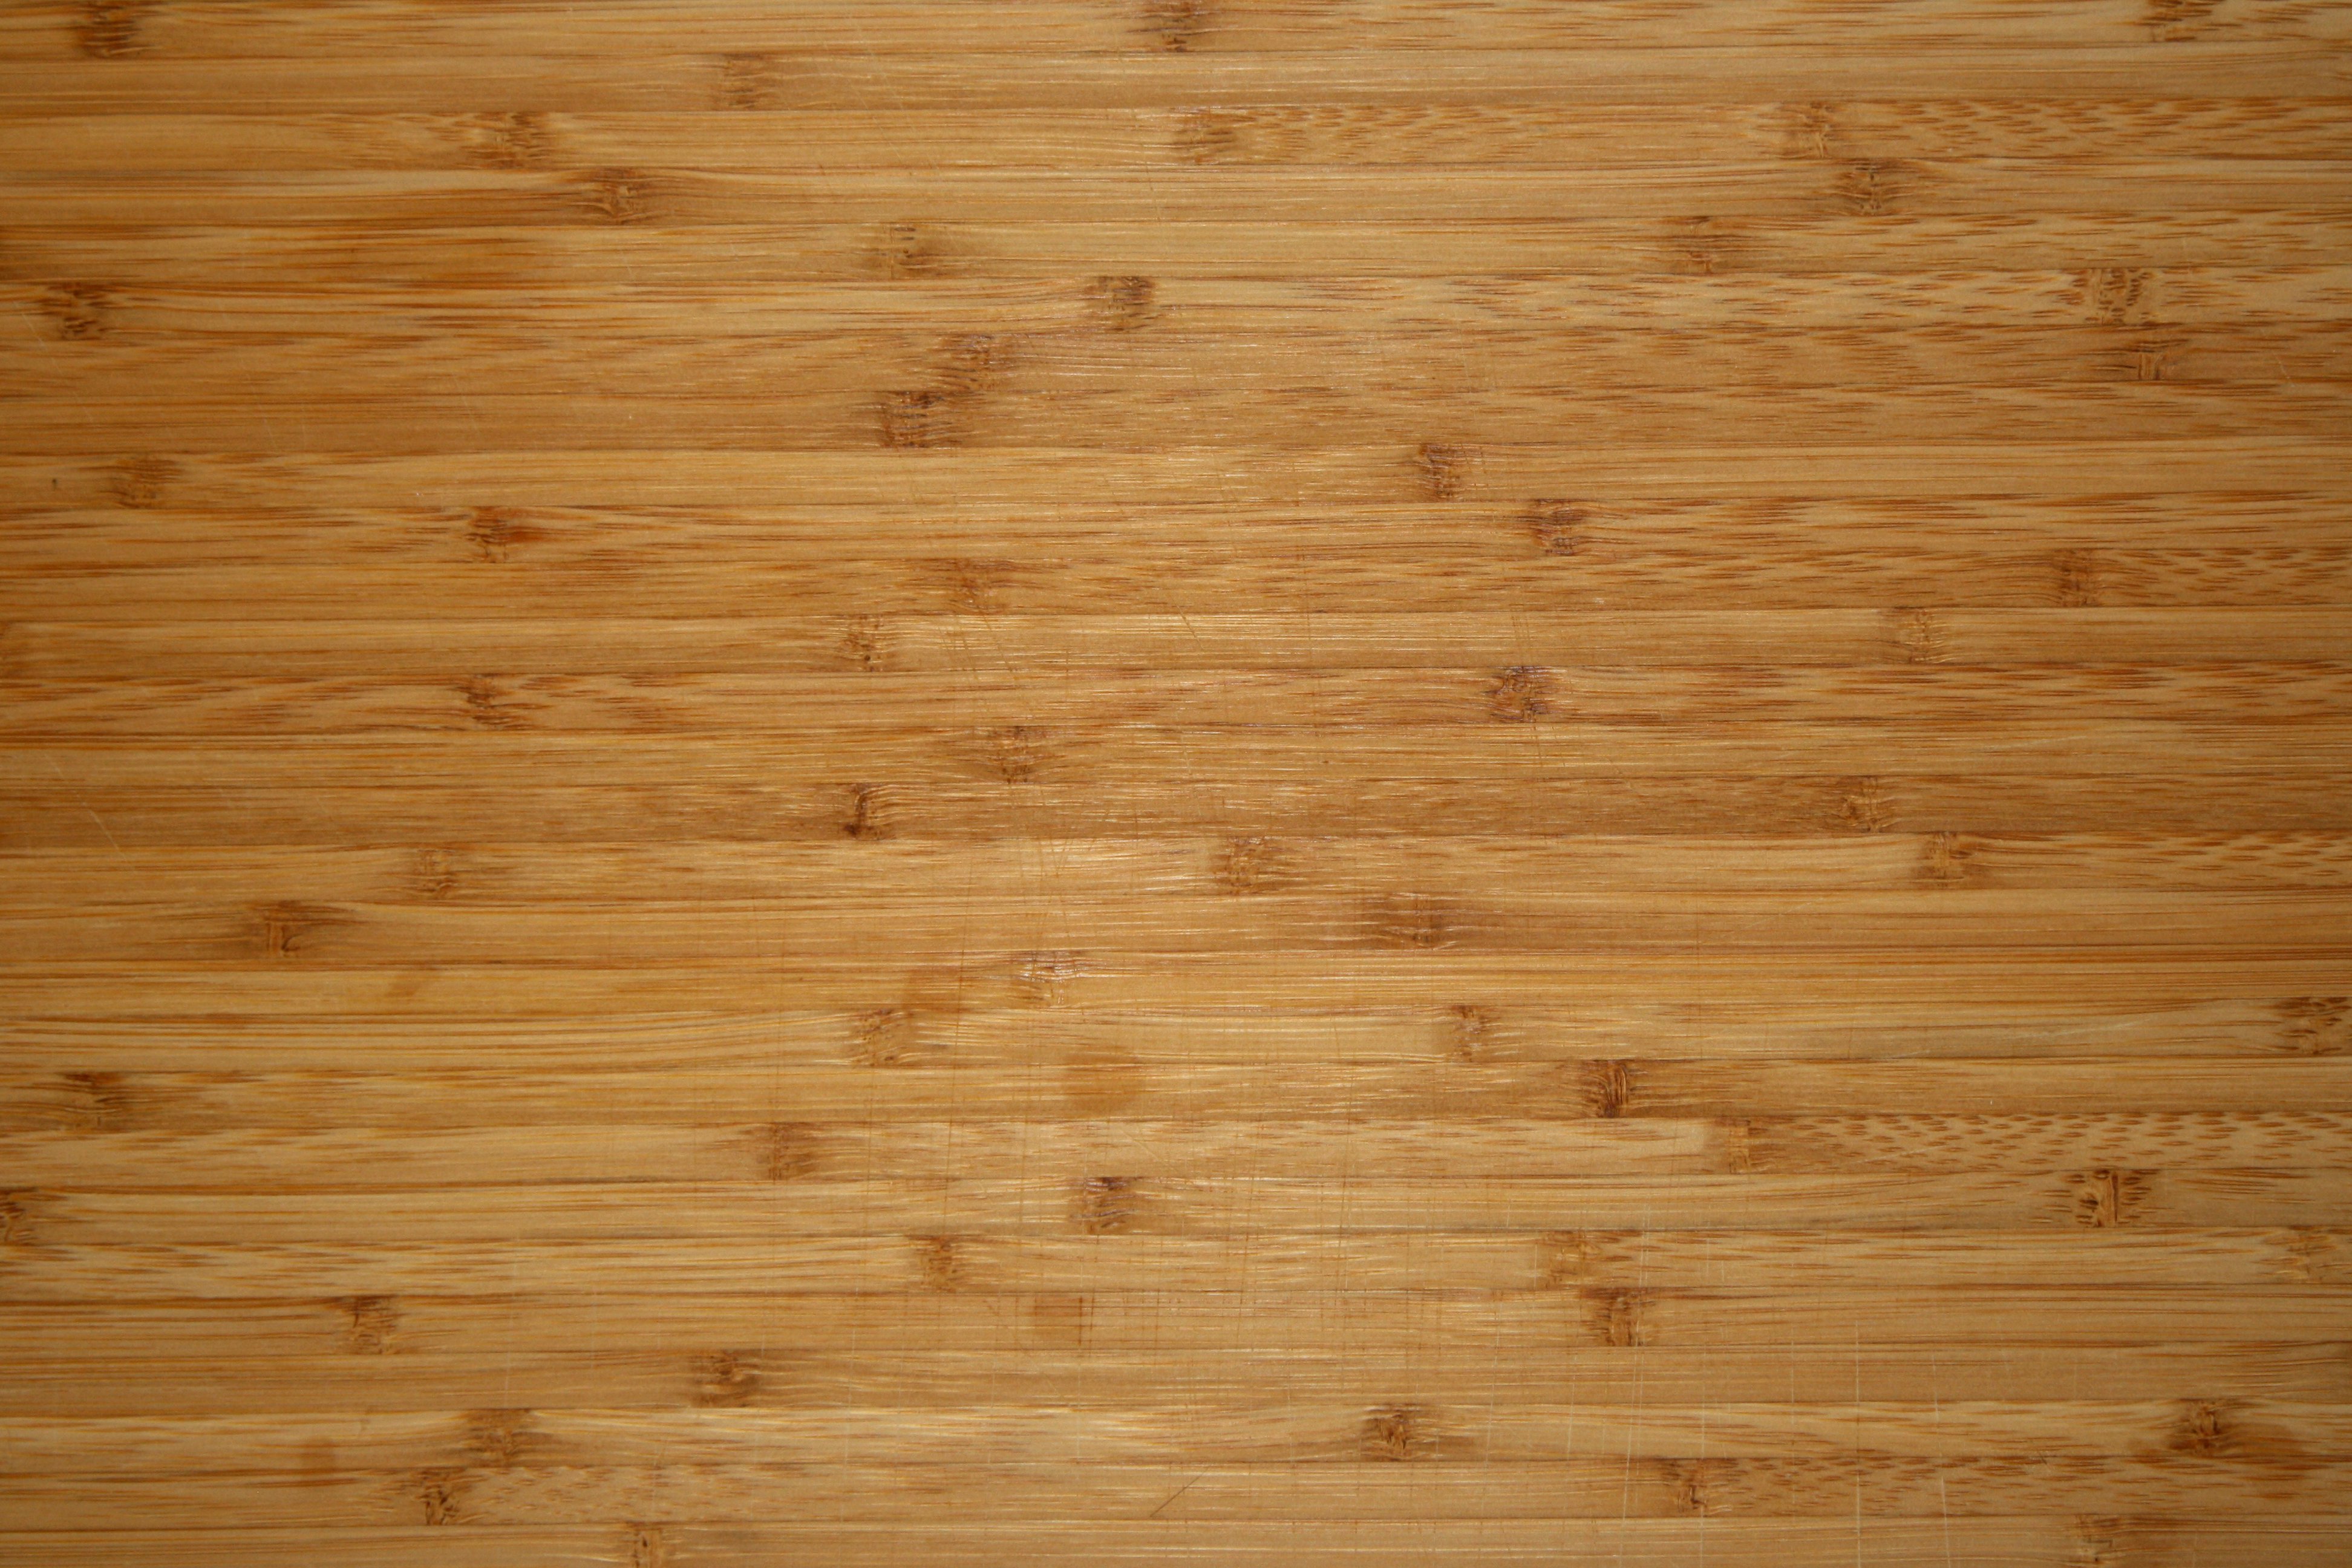 Bamboo Cutting Board Texture Picture | Free Photograph | Photos ...